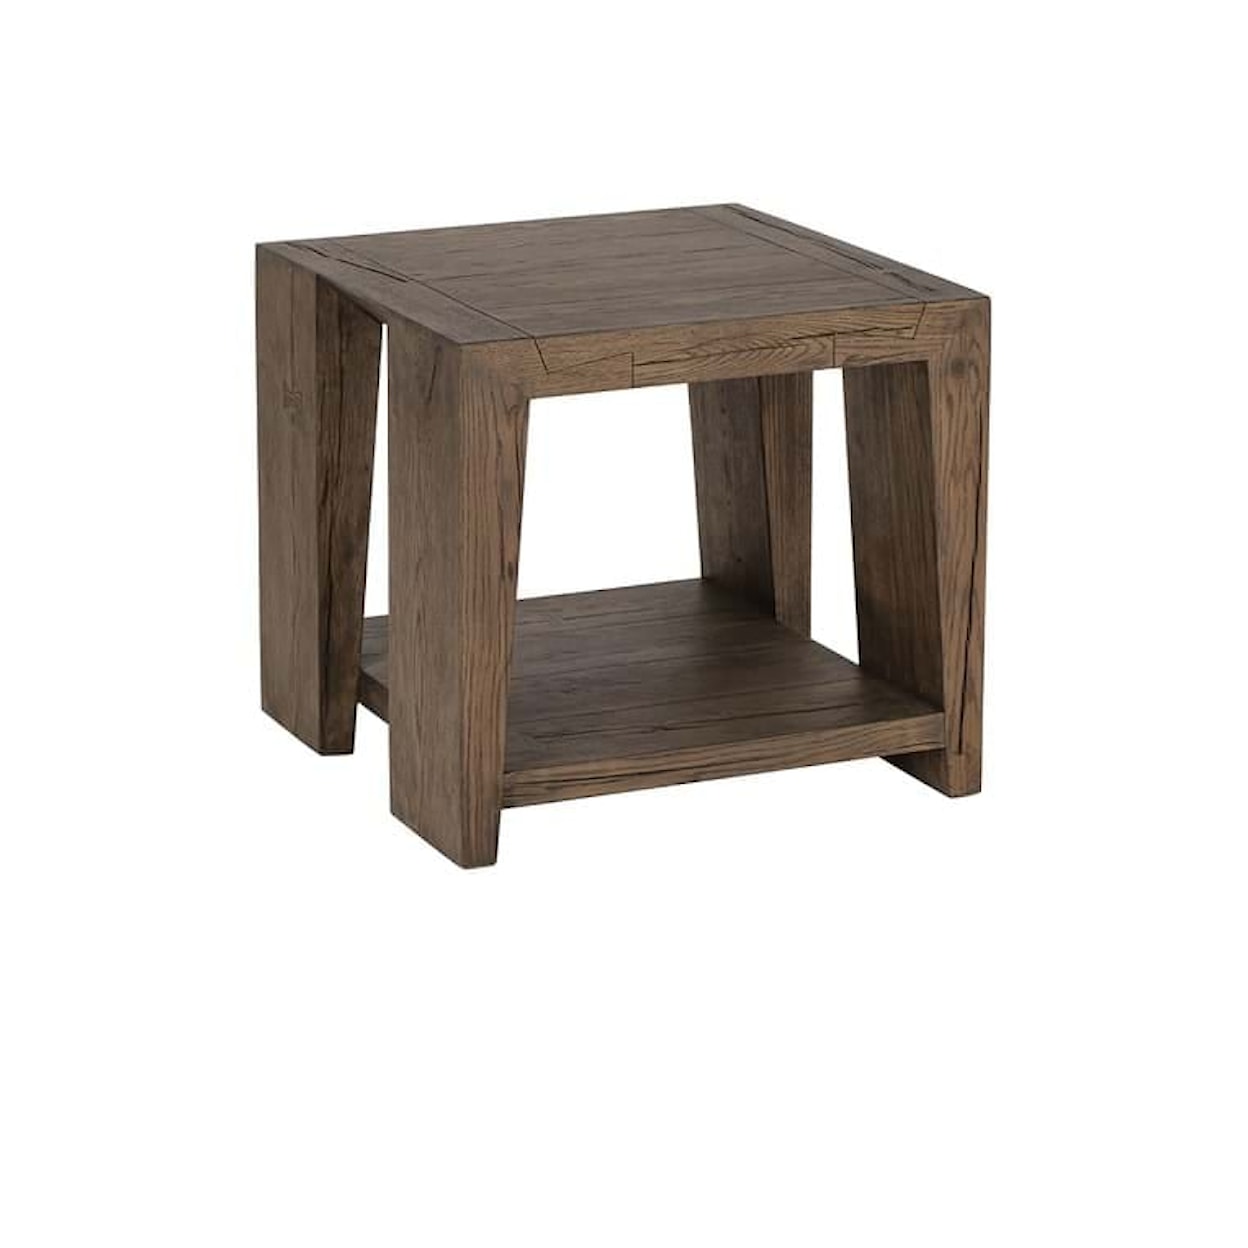 Classic Home Troy TROY END TABLE SUEDE BROWN